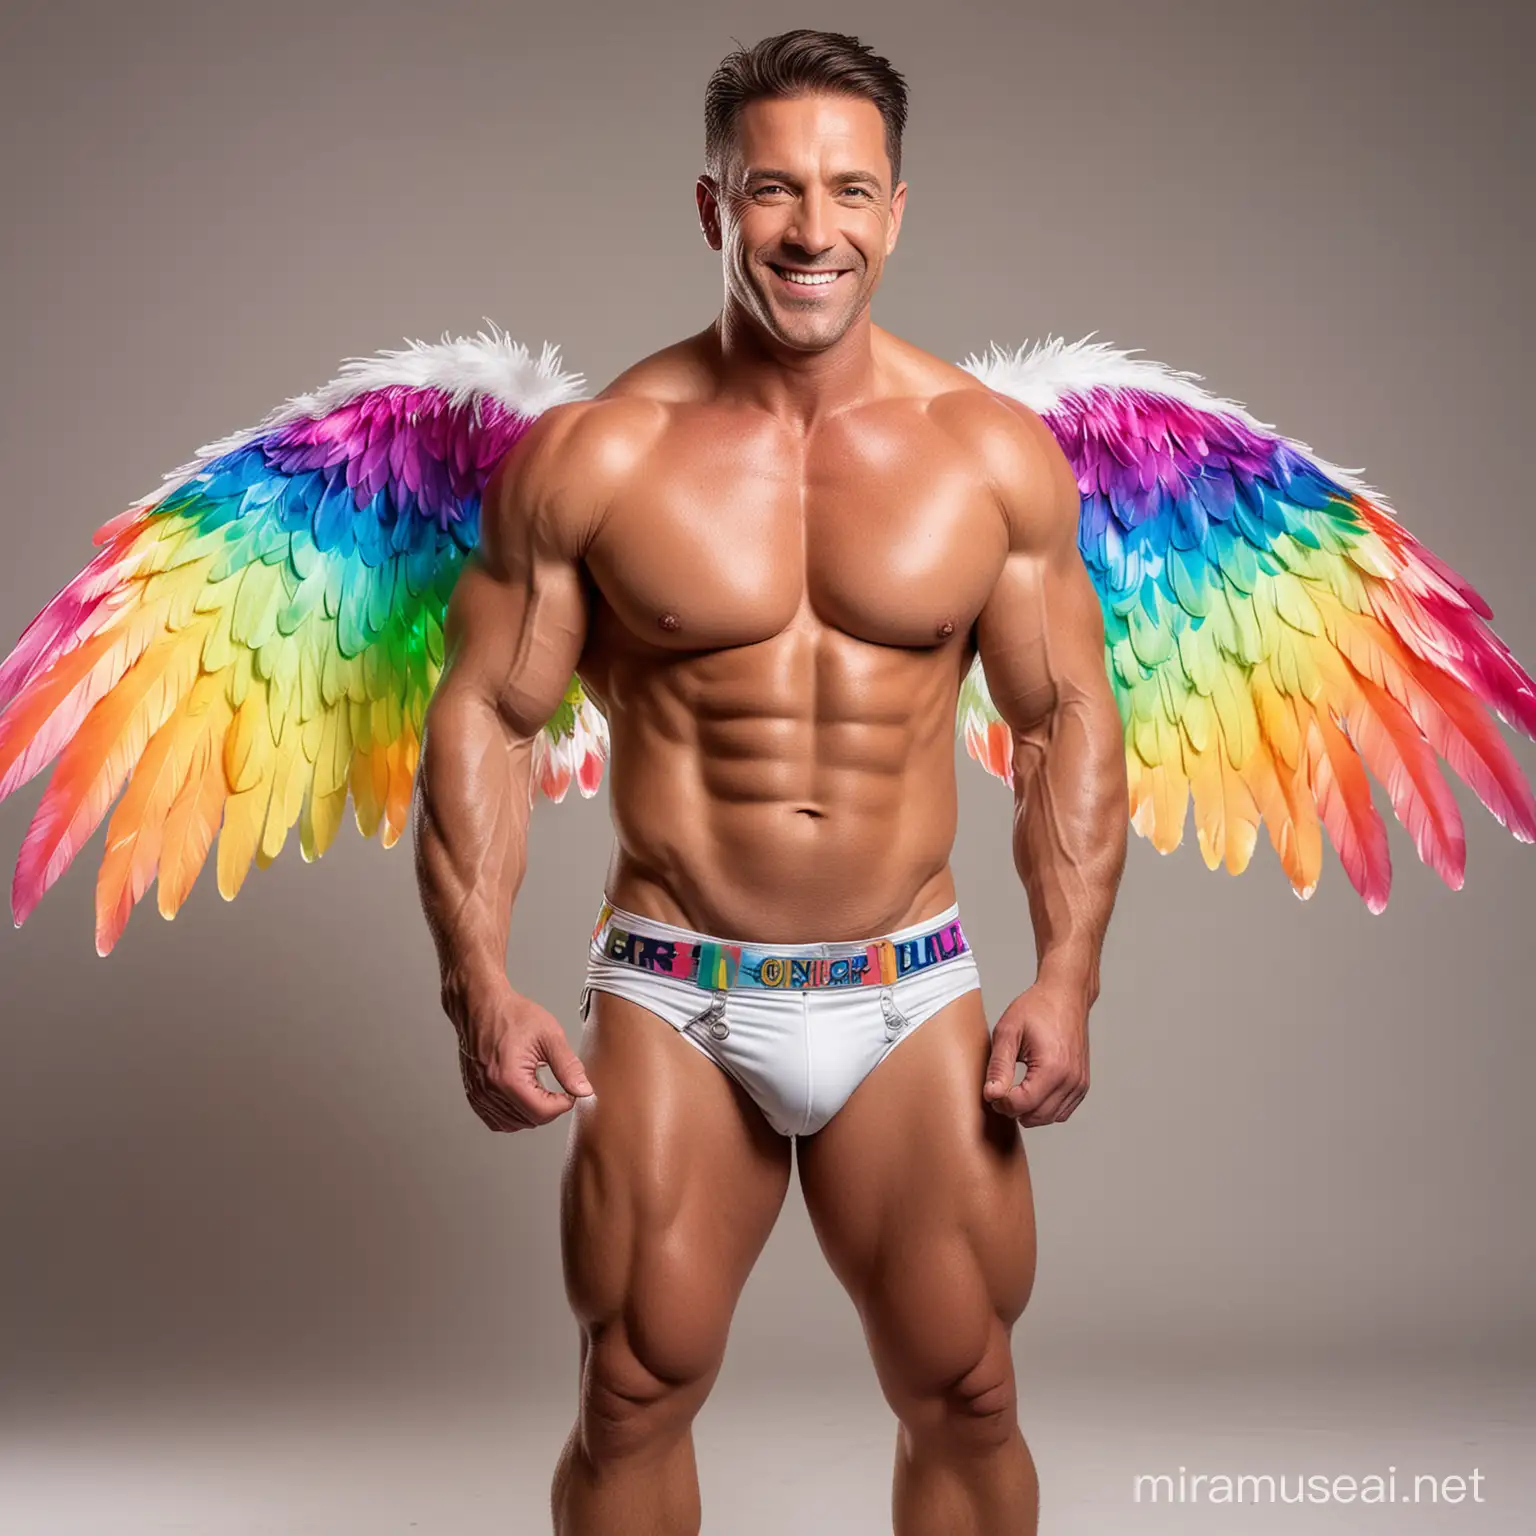 Studio Light Full Body to feet Topless 40s Ultra Chunky IFBB Bodybuilder Daddy with Great Smile wearing Multi-Highlighter Bright Rainbow with white Coloured See Through Eagle Wings Shoulder LED Jacket Short shorts left arm up Flexing